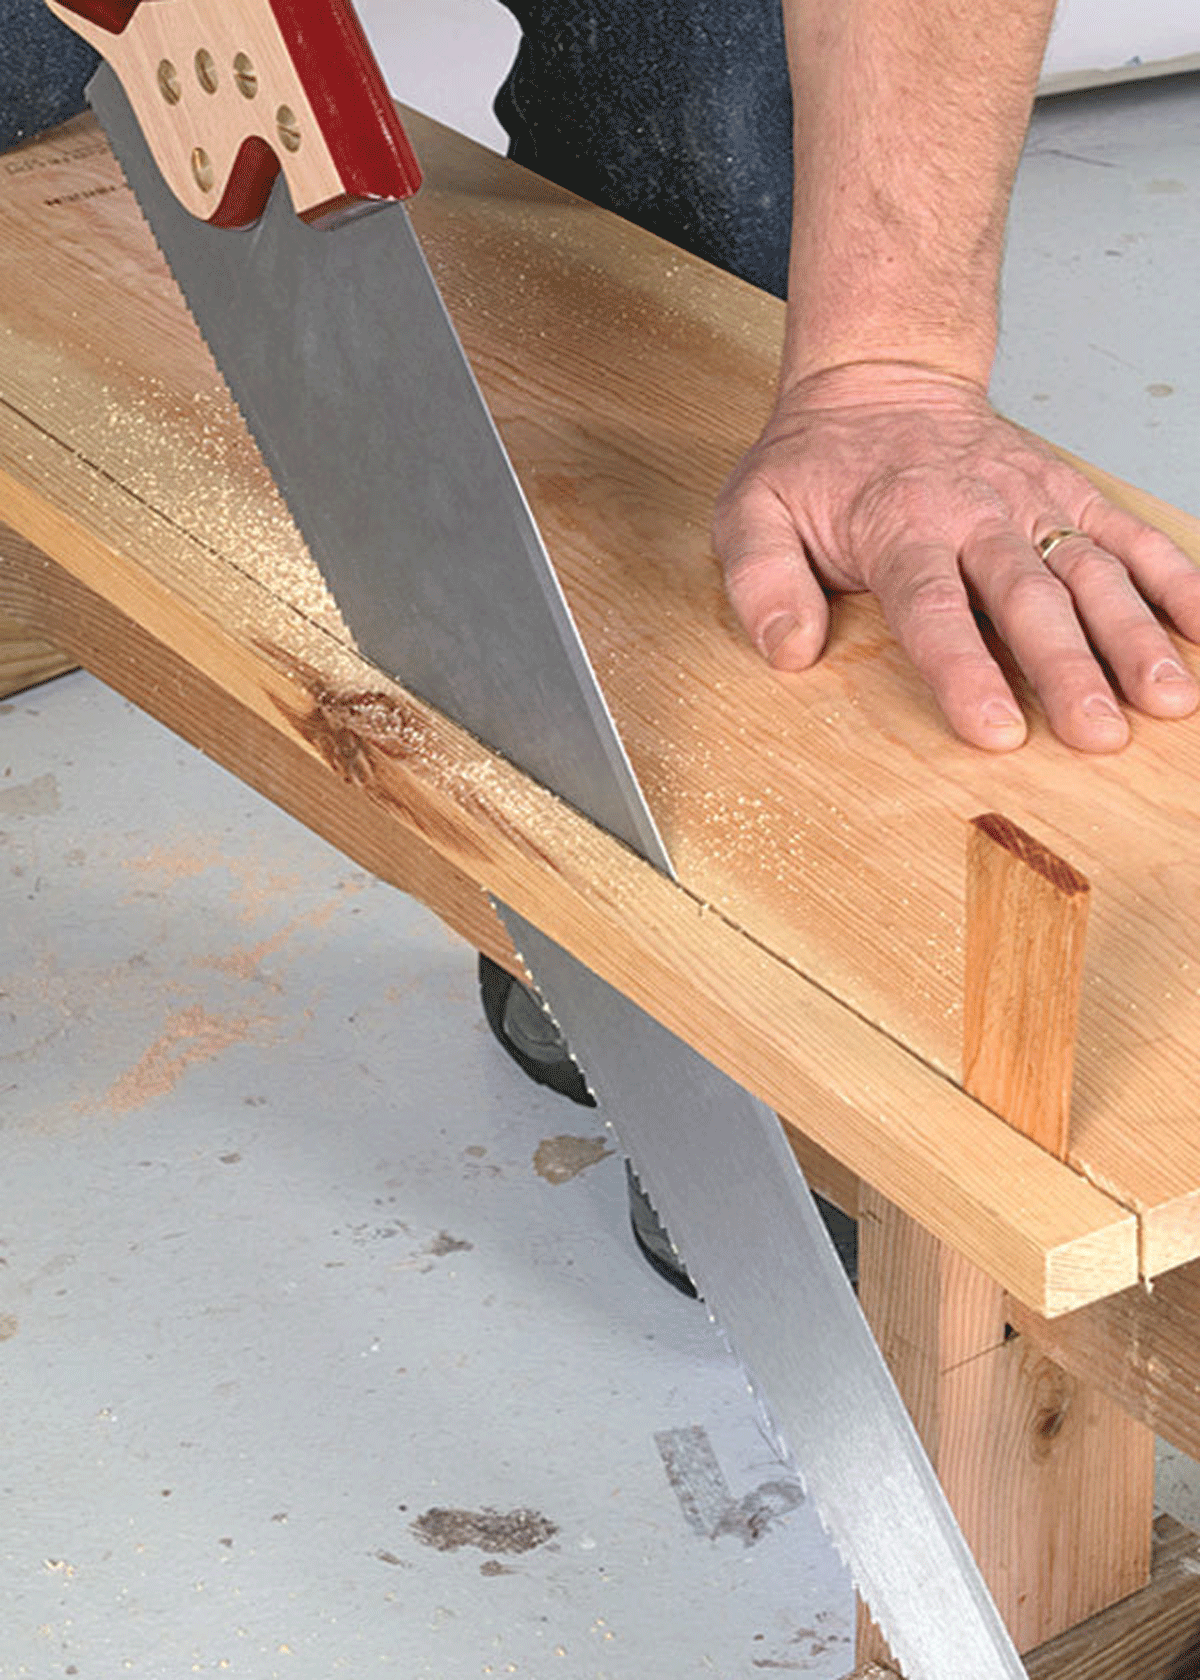 Rip with the right saw. Ripping a board (cutting with the grain) is usually more difficult than crosscutting. Use the right saw: a traditional Western-style ripsaw (shown in the photo), a Japanese ripsaw, or a modern hybrid saw. Cutting action is best with the blade at a 60° angle. If the kerf starts to close and pinch the blade, use a wedge to keep it open.